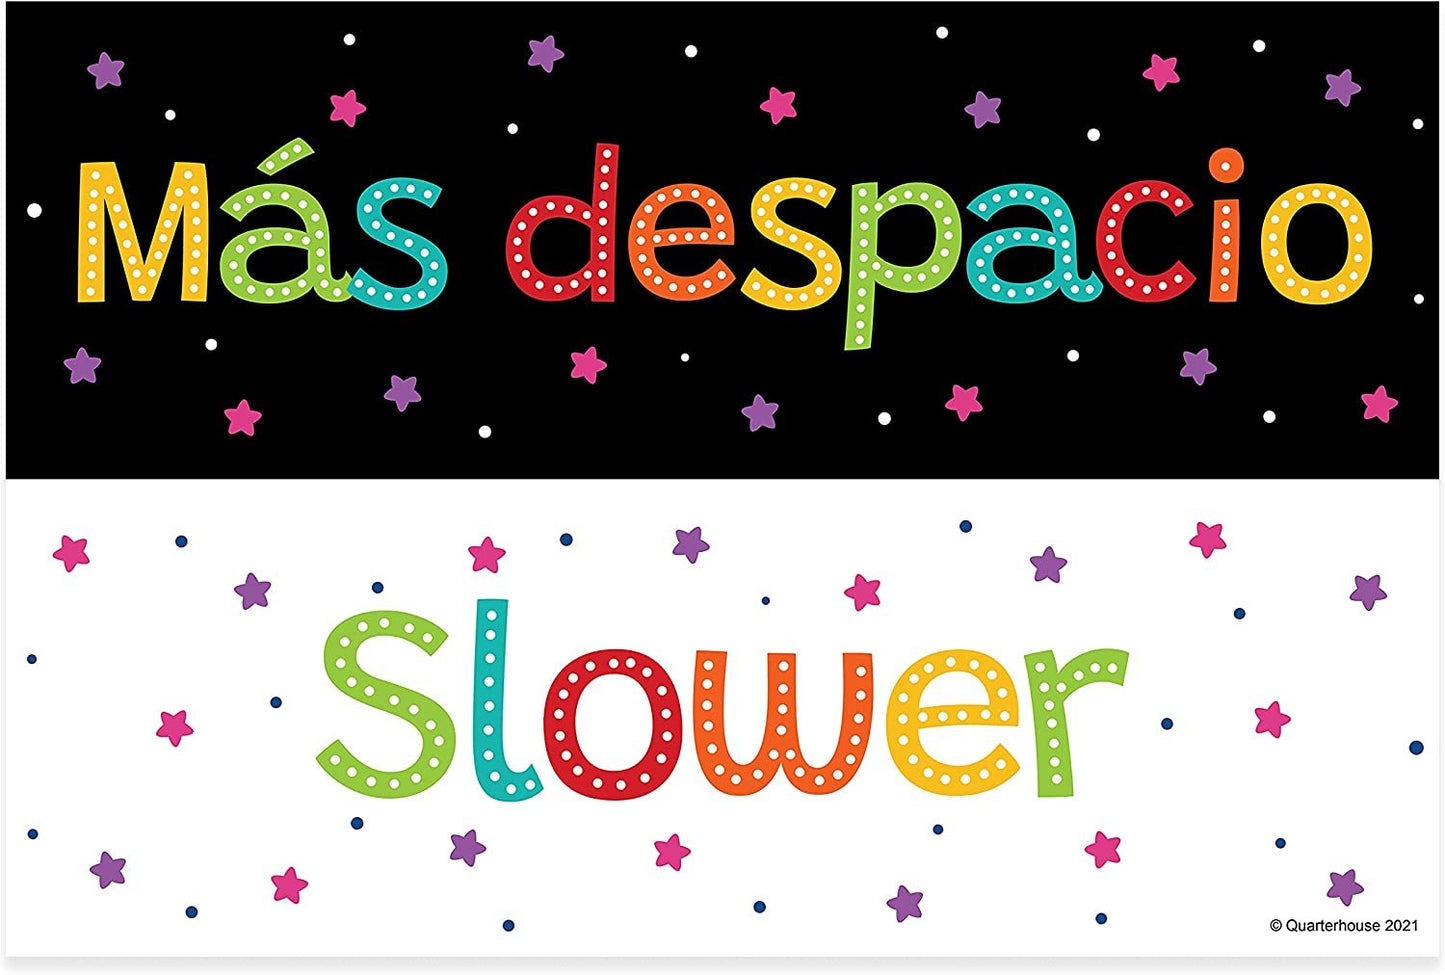 Quarterhouse Spanish Words and Phrases Poster Set, Spanish - ESL Classroom Learning Materials for K-12 Students and Teachers, Set of 12, 12 x 18 Inches, Extra Durable